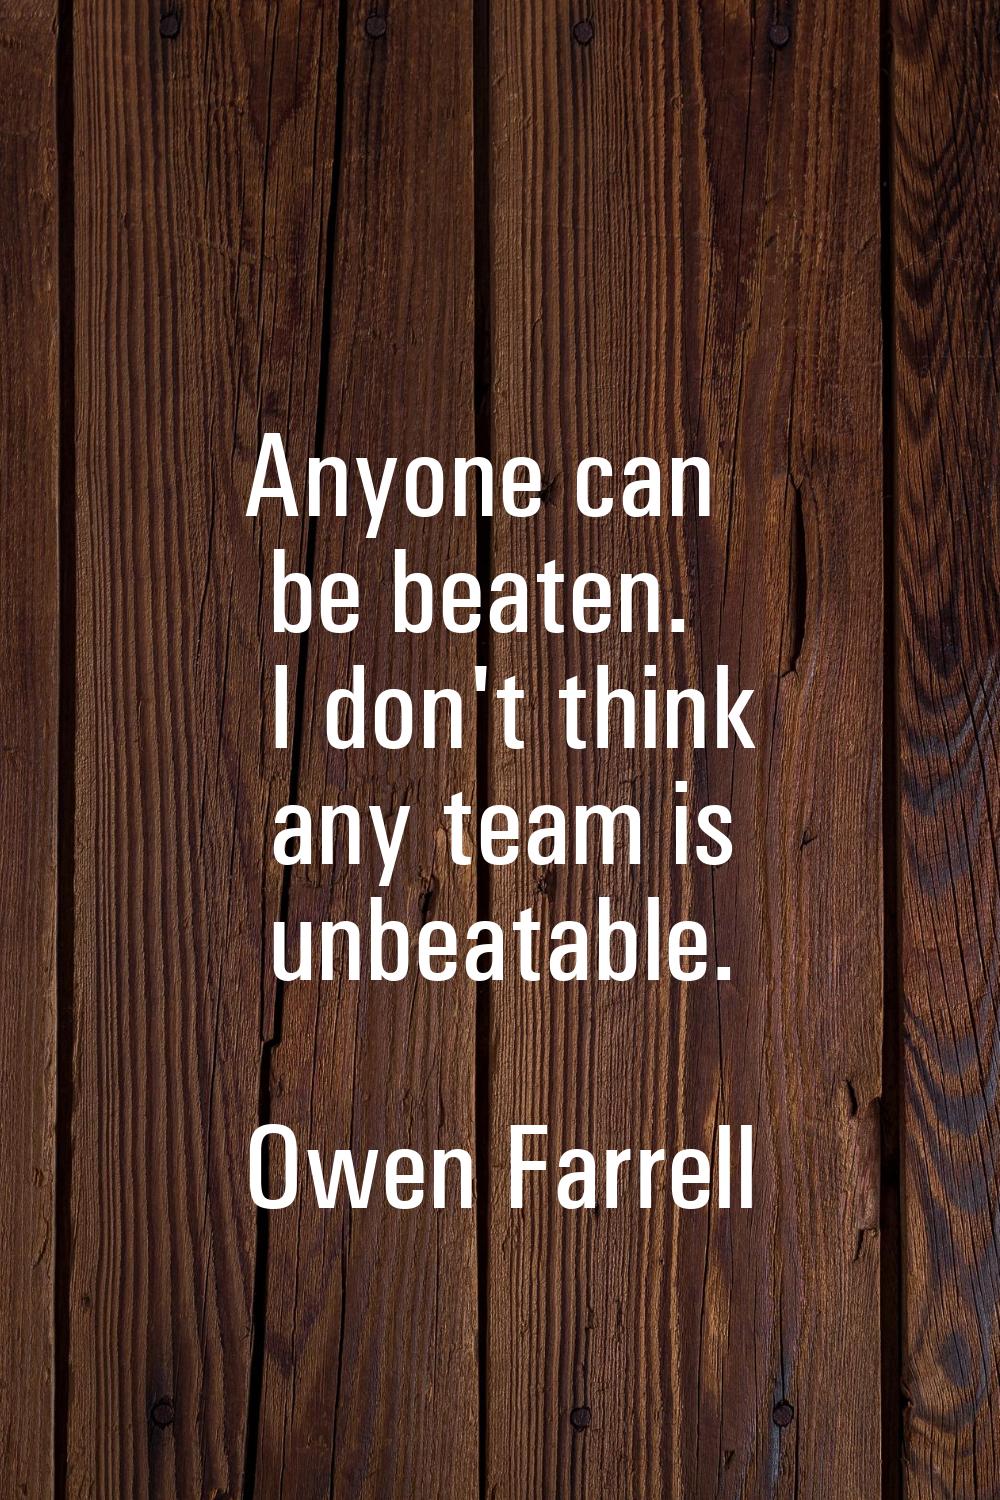 Anyone can be beaten. I don't think any team is unbeatable.